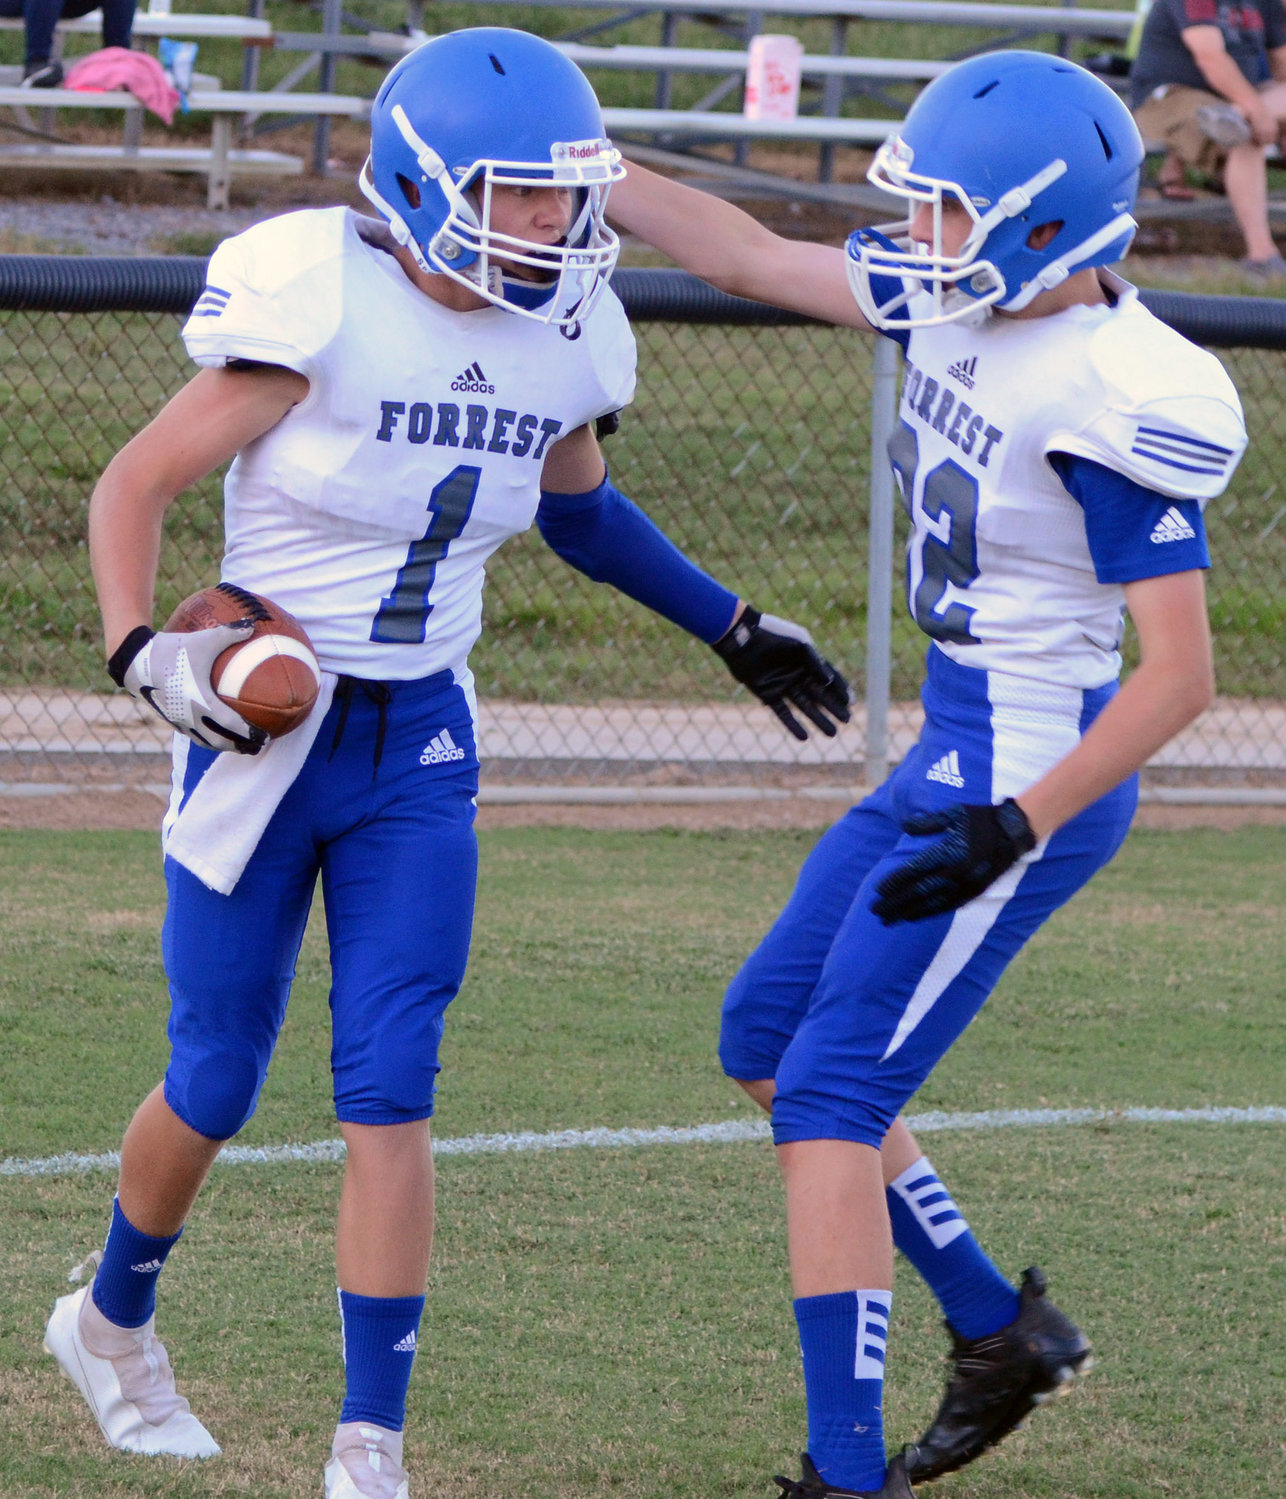 Forrest seventh-grade standout Fletcher Fields (1) is congratulated by eighth-grade standout Eli Bell (22) after Fields came up with a pick-six on the second play of the game.